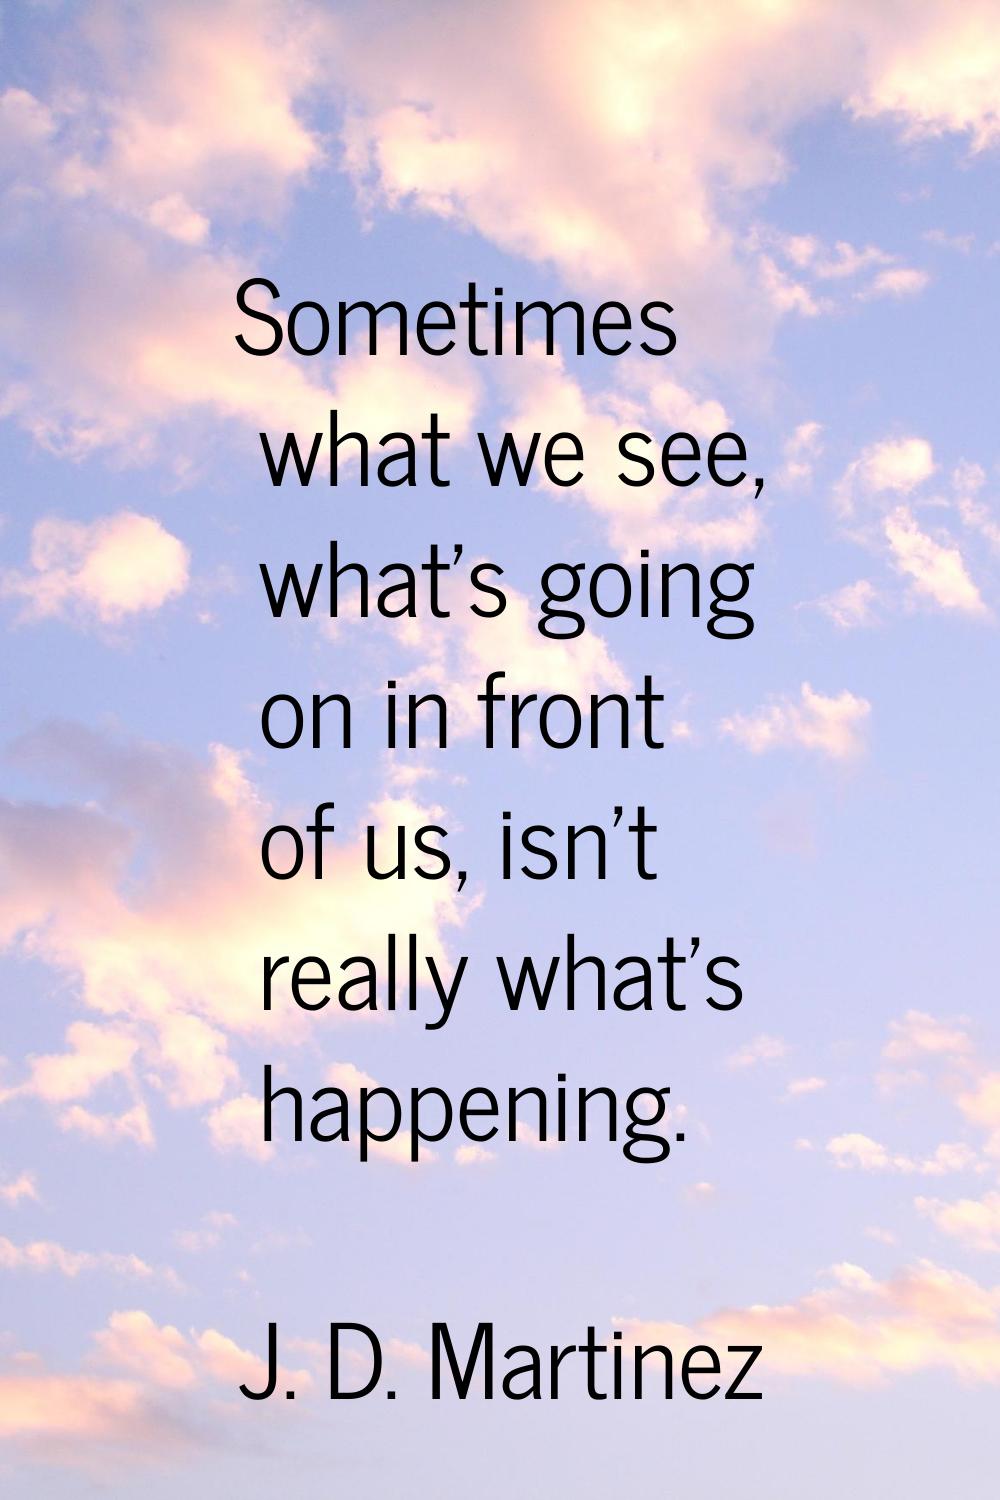 Sometimes what we see, what's going on in front of us, isn't really what's happening.